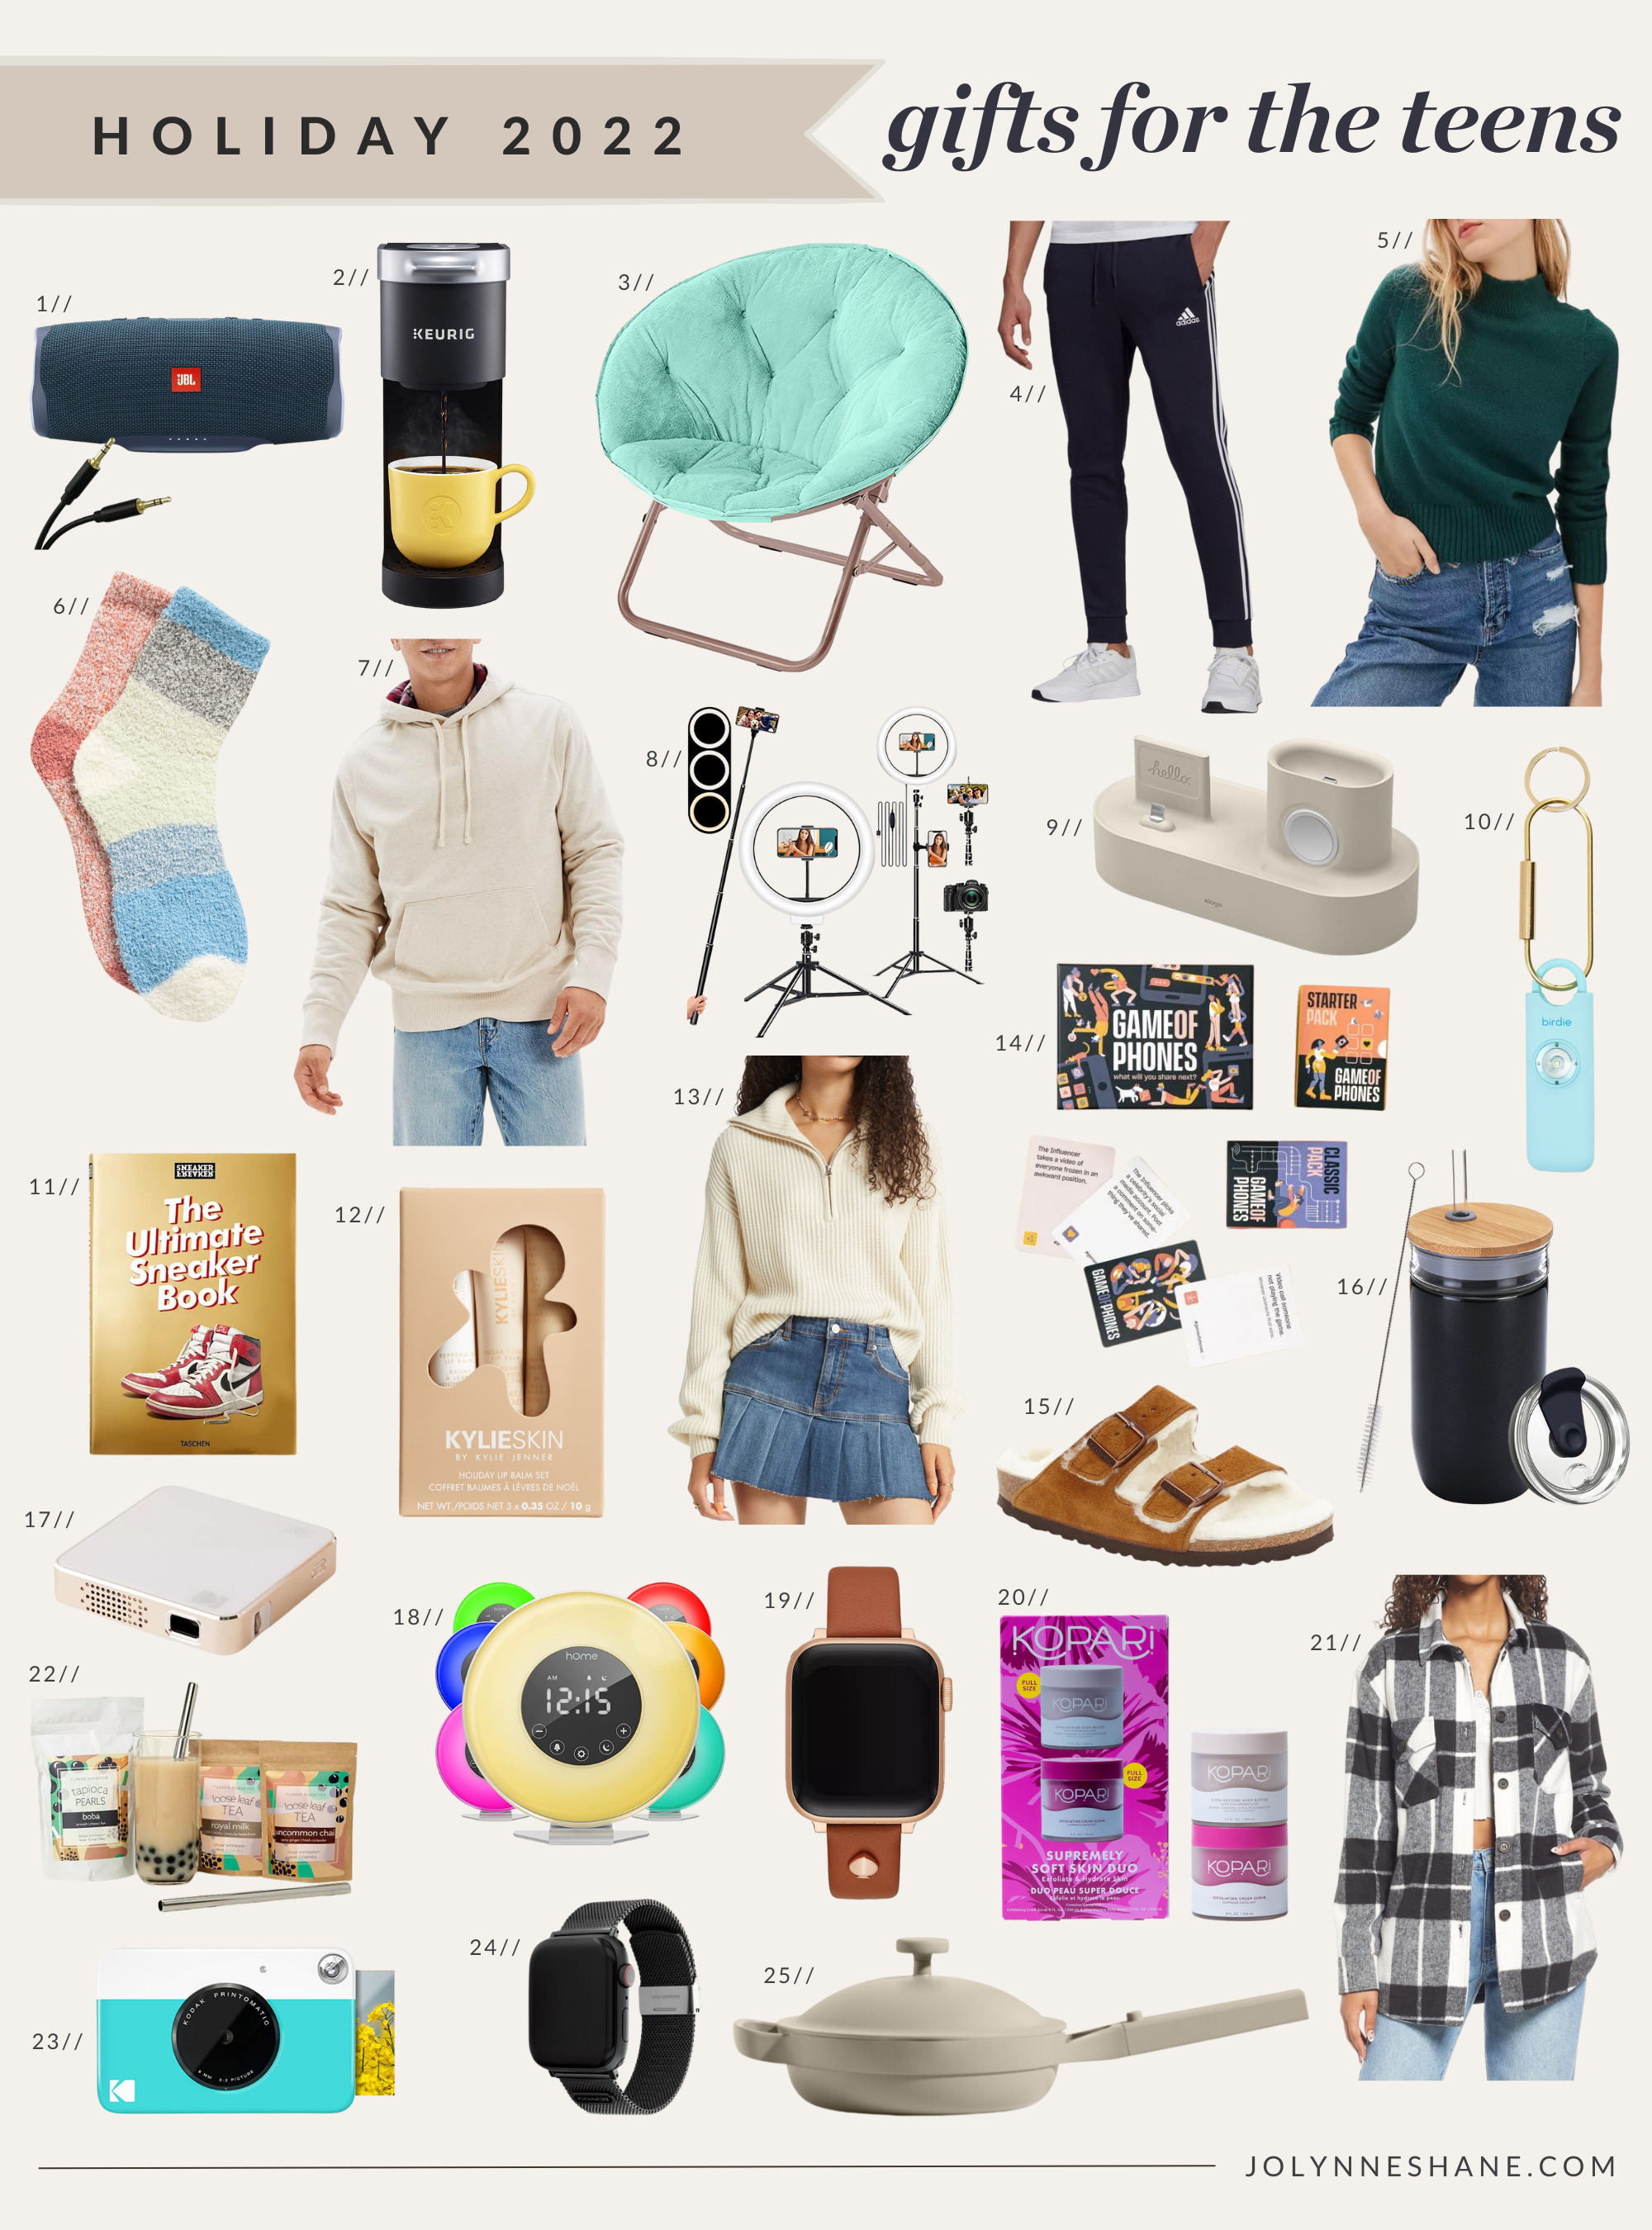 Holiday Gift Guide for Teens {Girls & Boys}